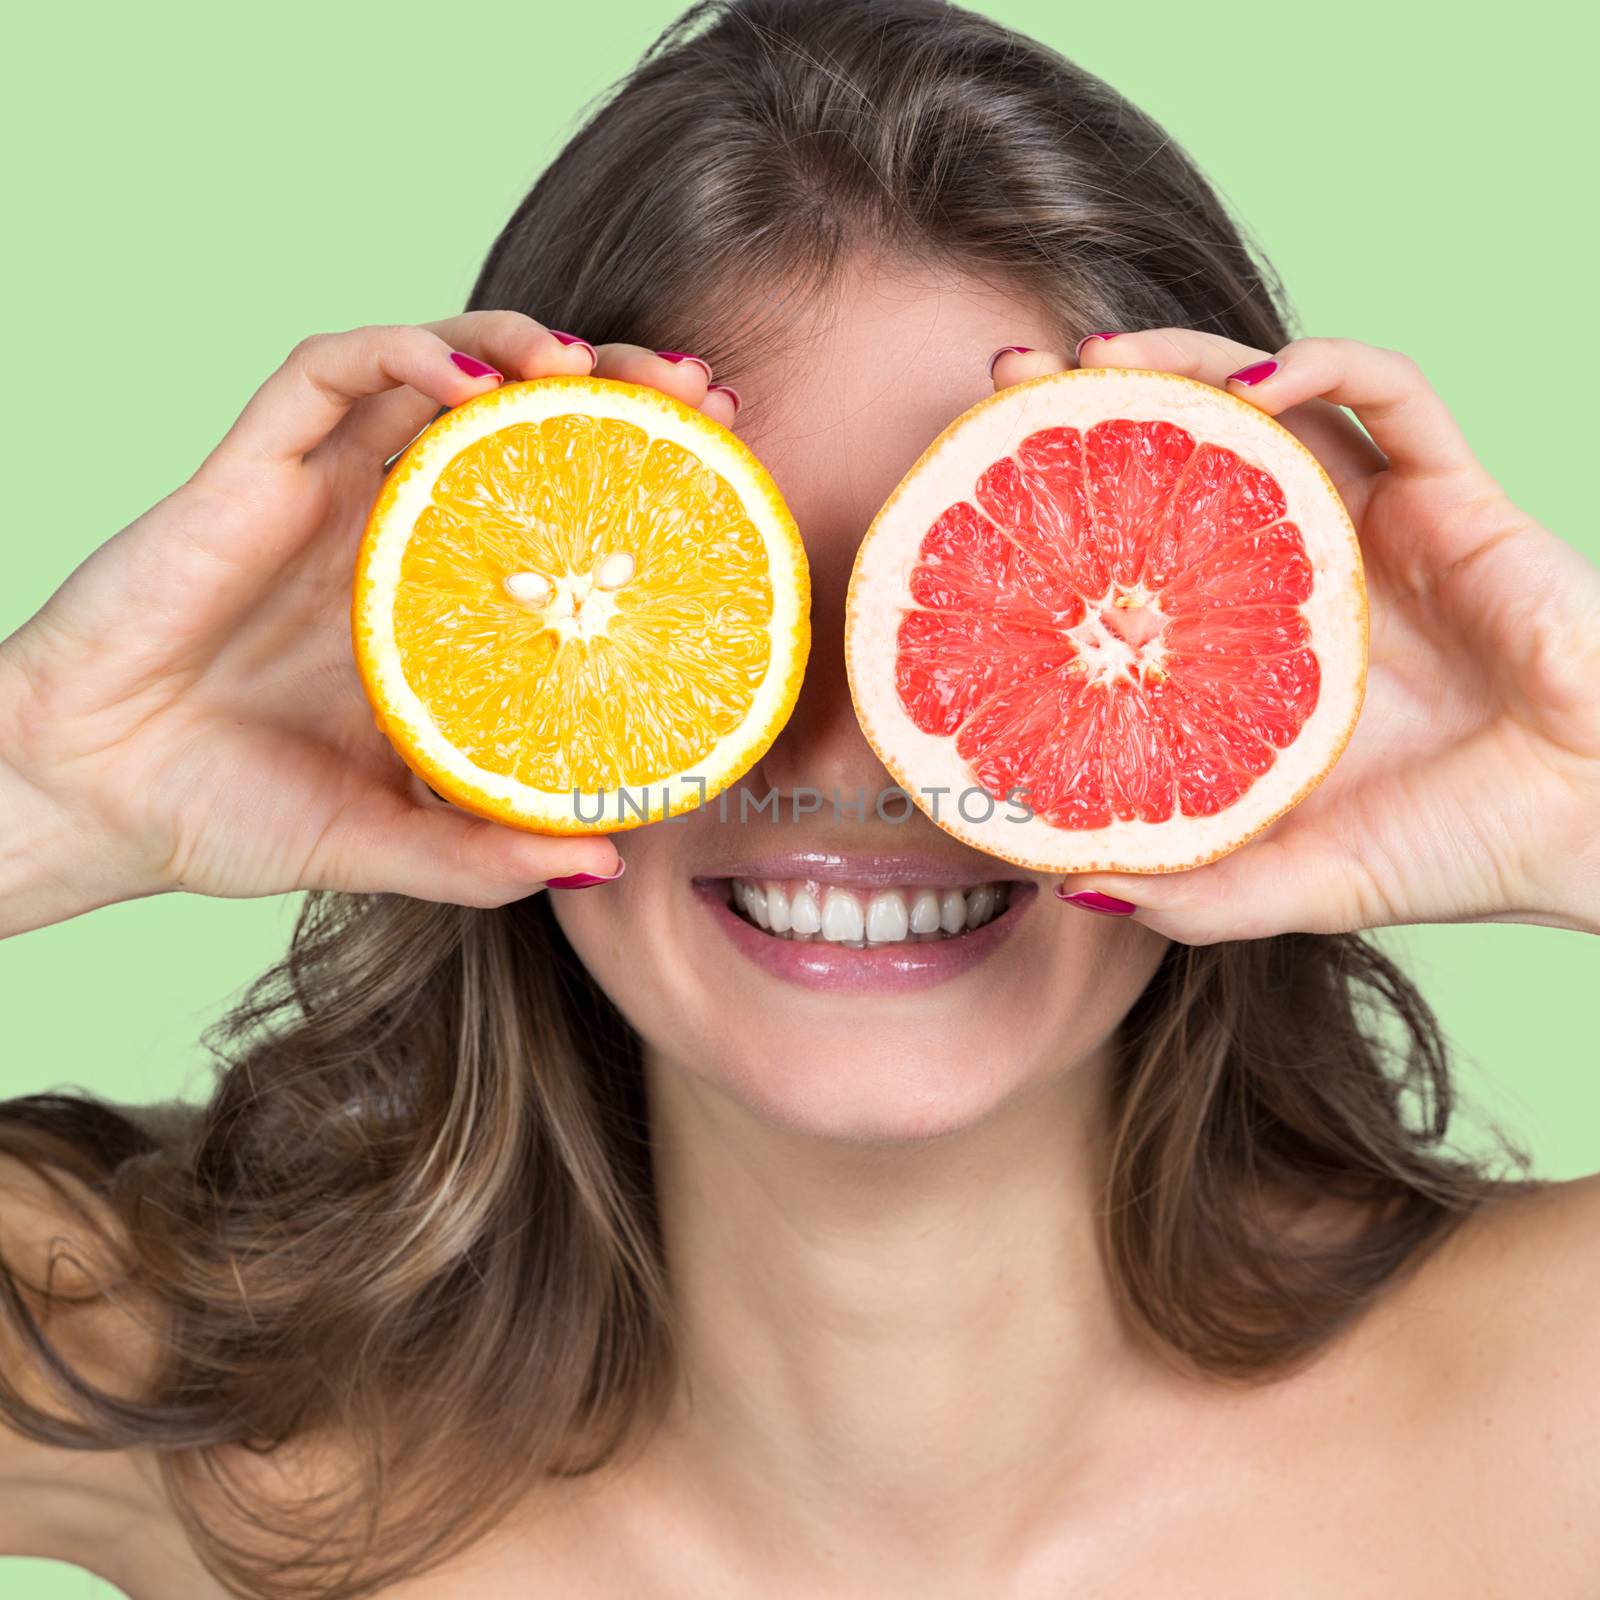 Smiling woman holding citrus slices by ALotOfPeople